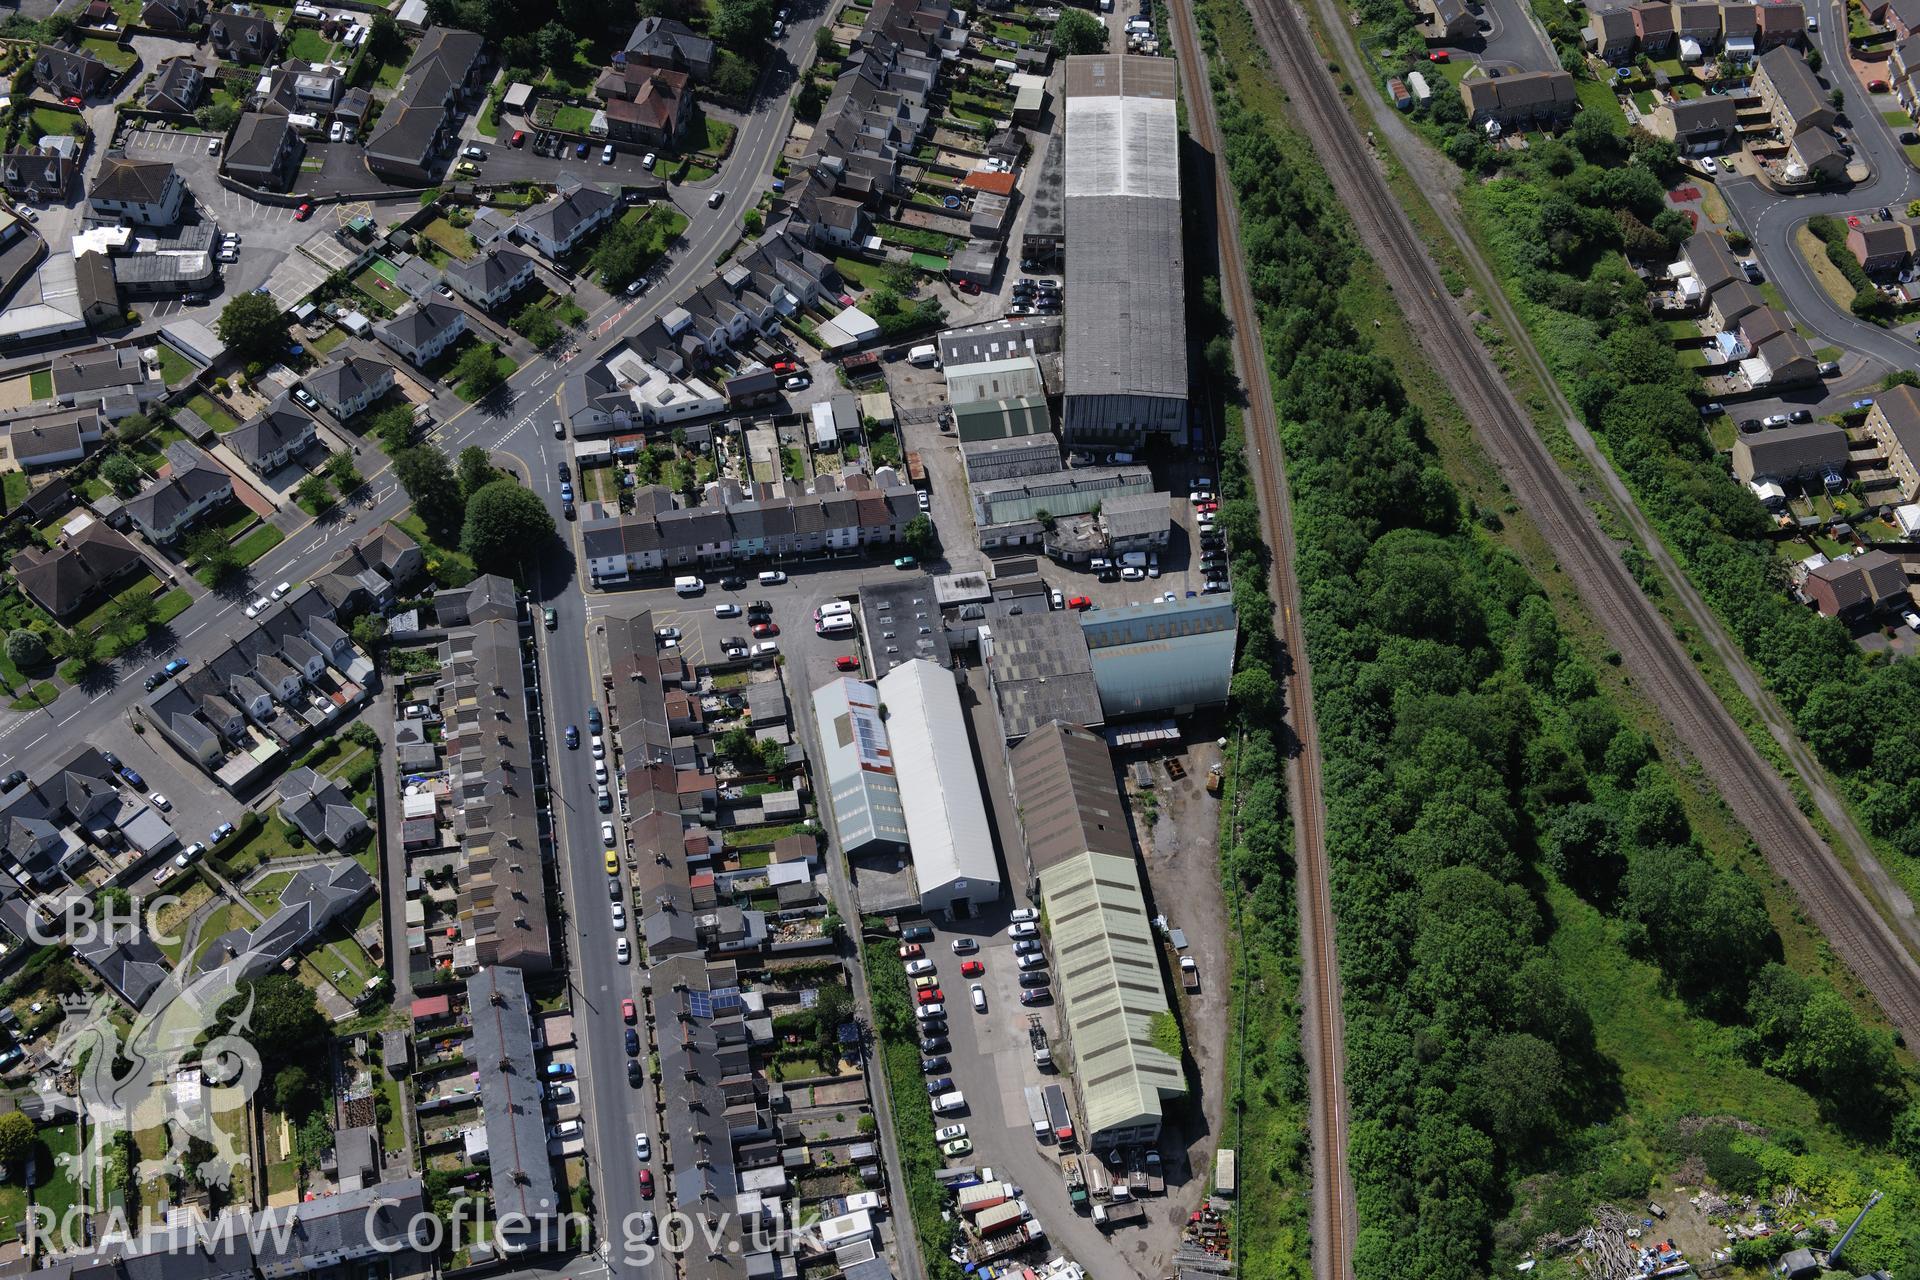 Railway and industrial units on Australia Terrace, behind Coity Road, Bridgend. Oblique aerial photograph taken during the Royal Commission's programme of archaeological aerial reconnaissance by Toby Driver on 19th June 2015.